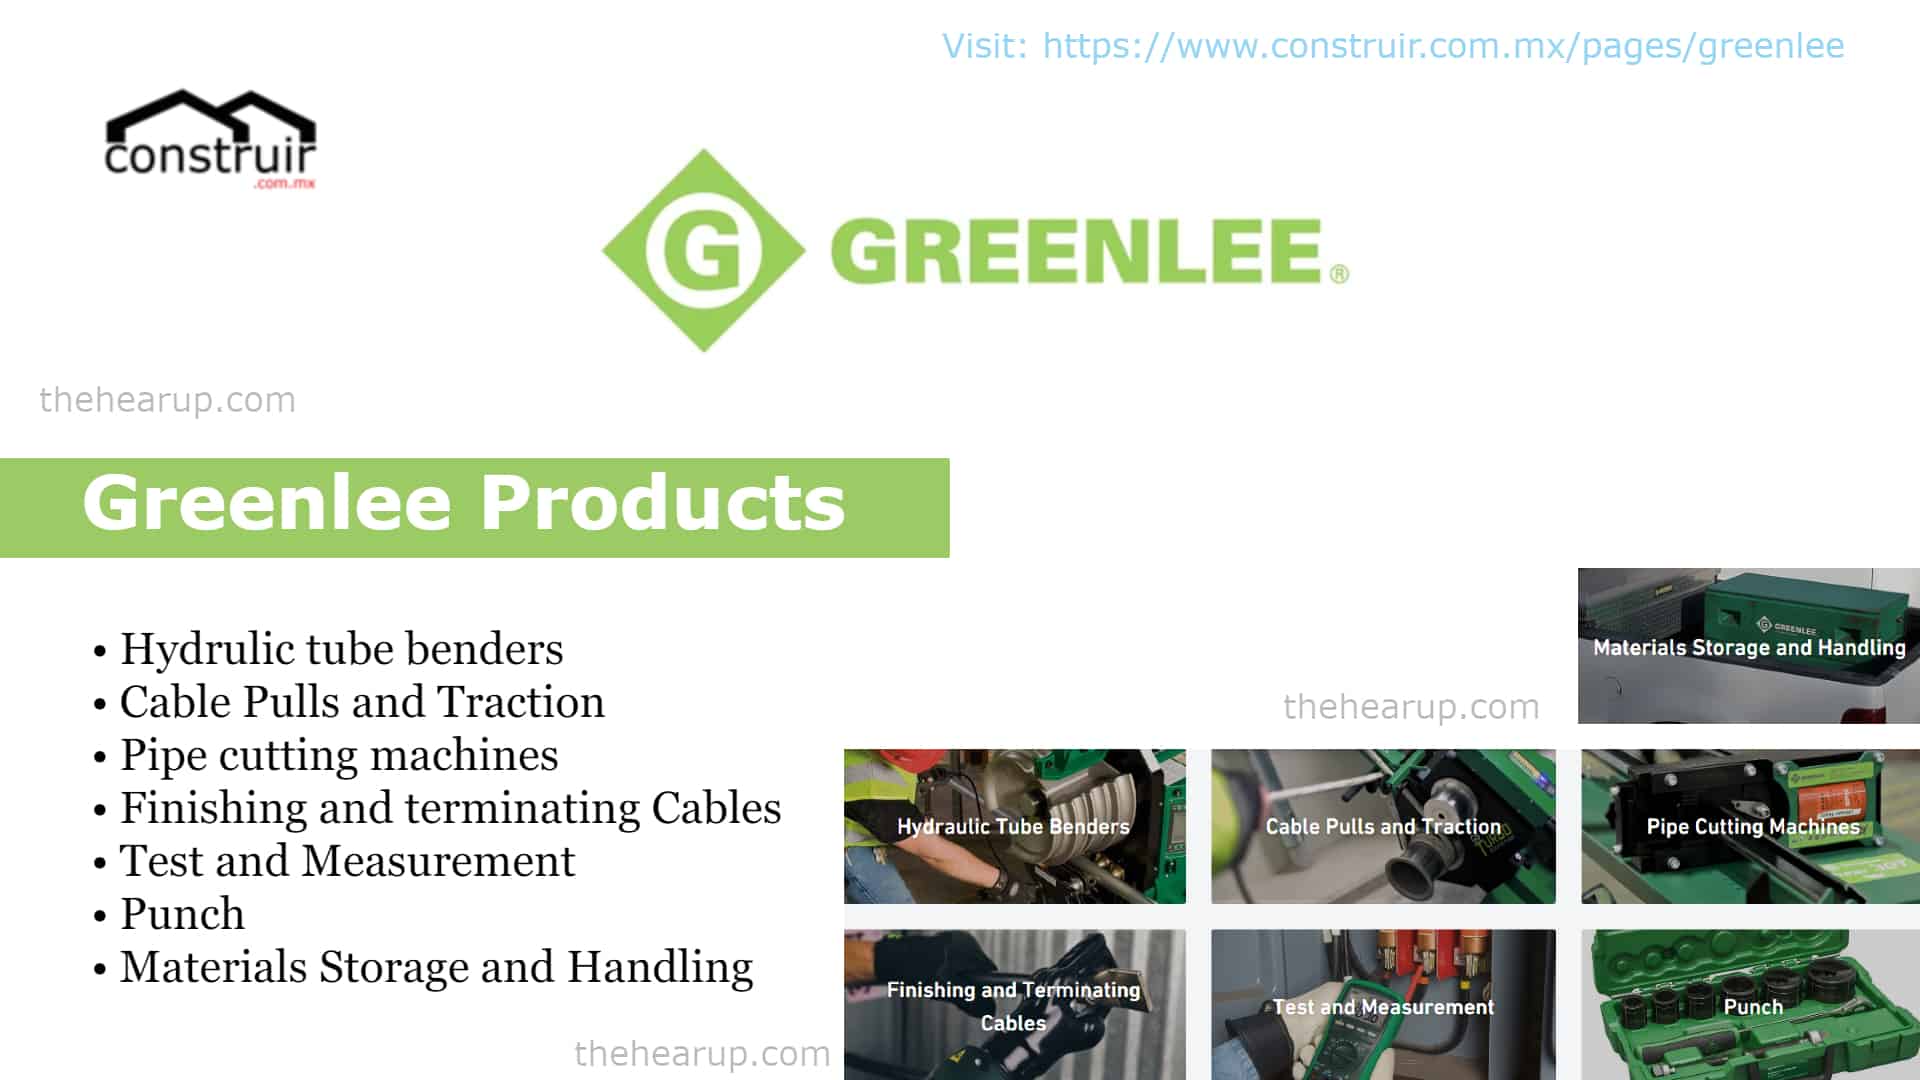 A wide Varity of Greenlee Products